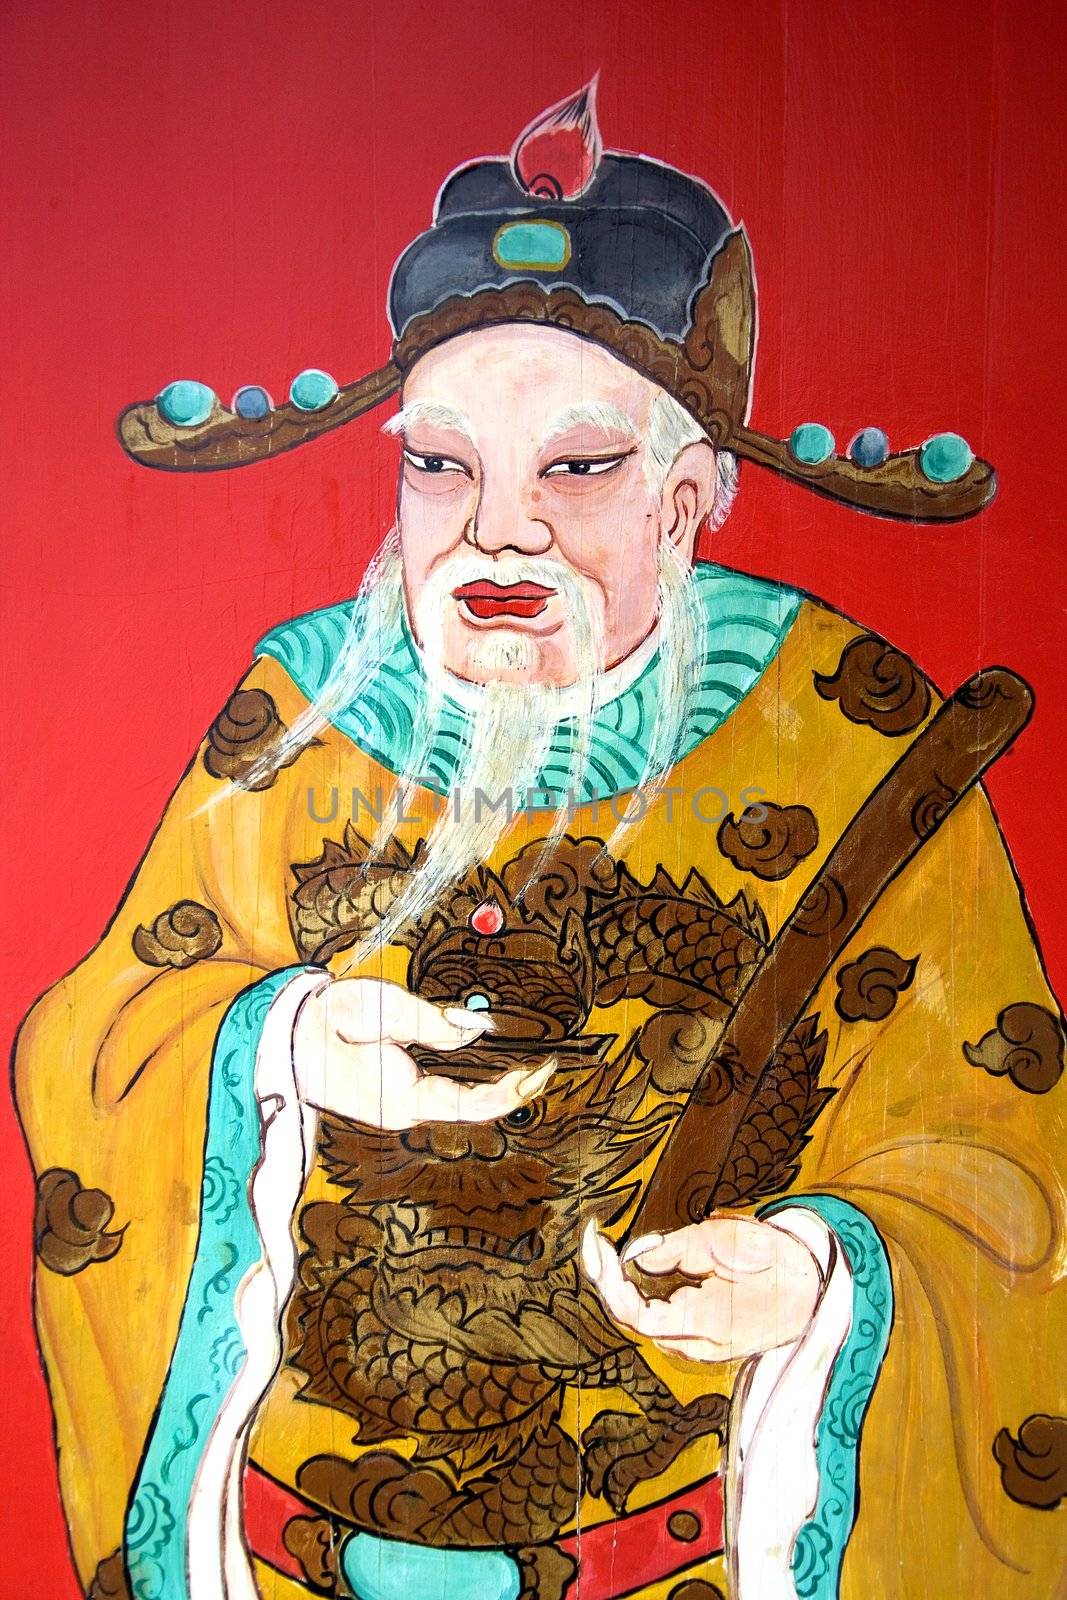 Image of a guardian painted on a chinese temple door in Malaysia.